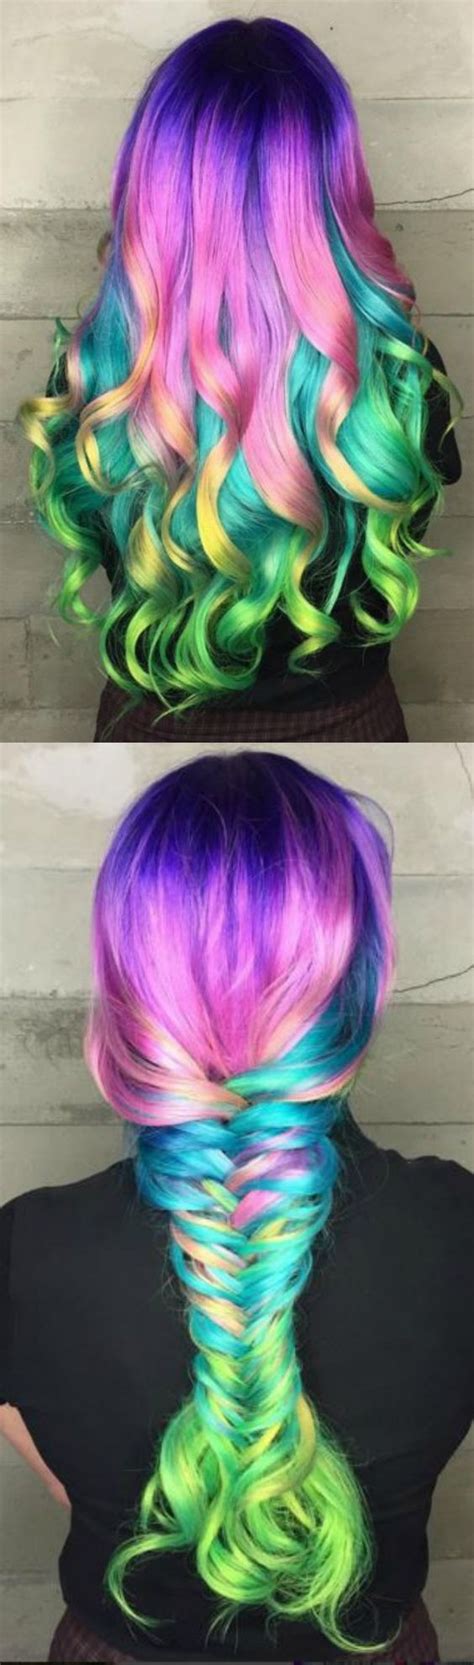 Mermaid Colored Hair Pictures Photos And Images For